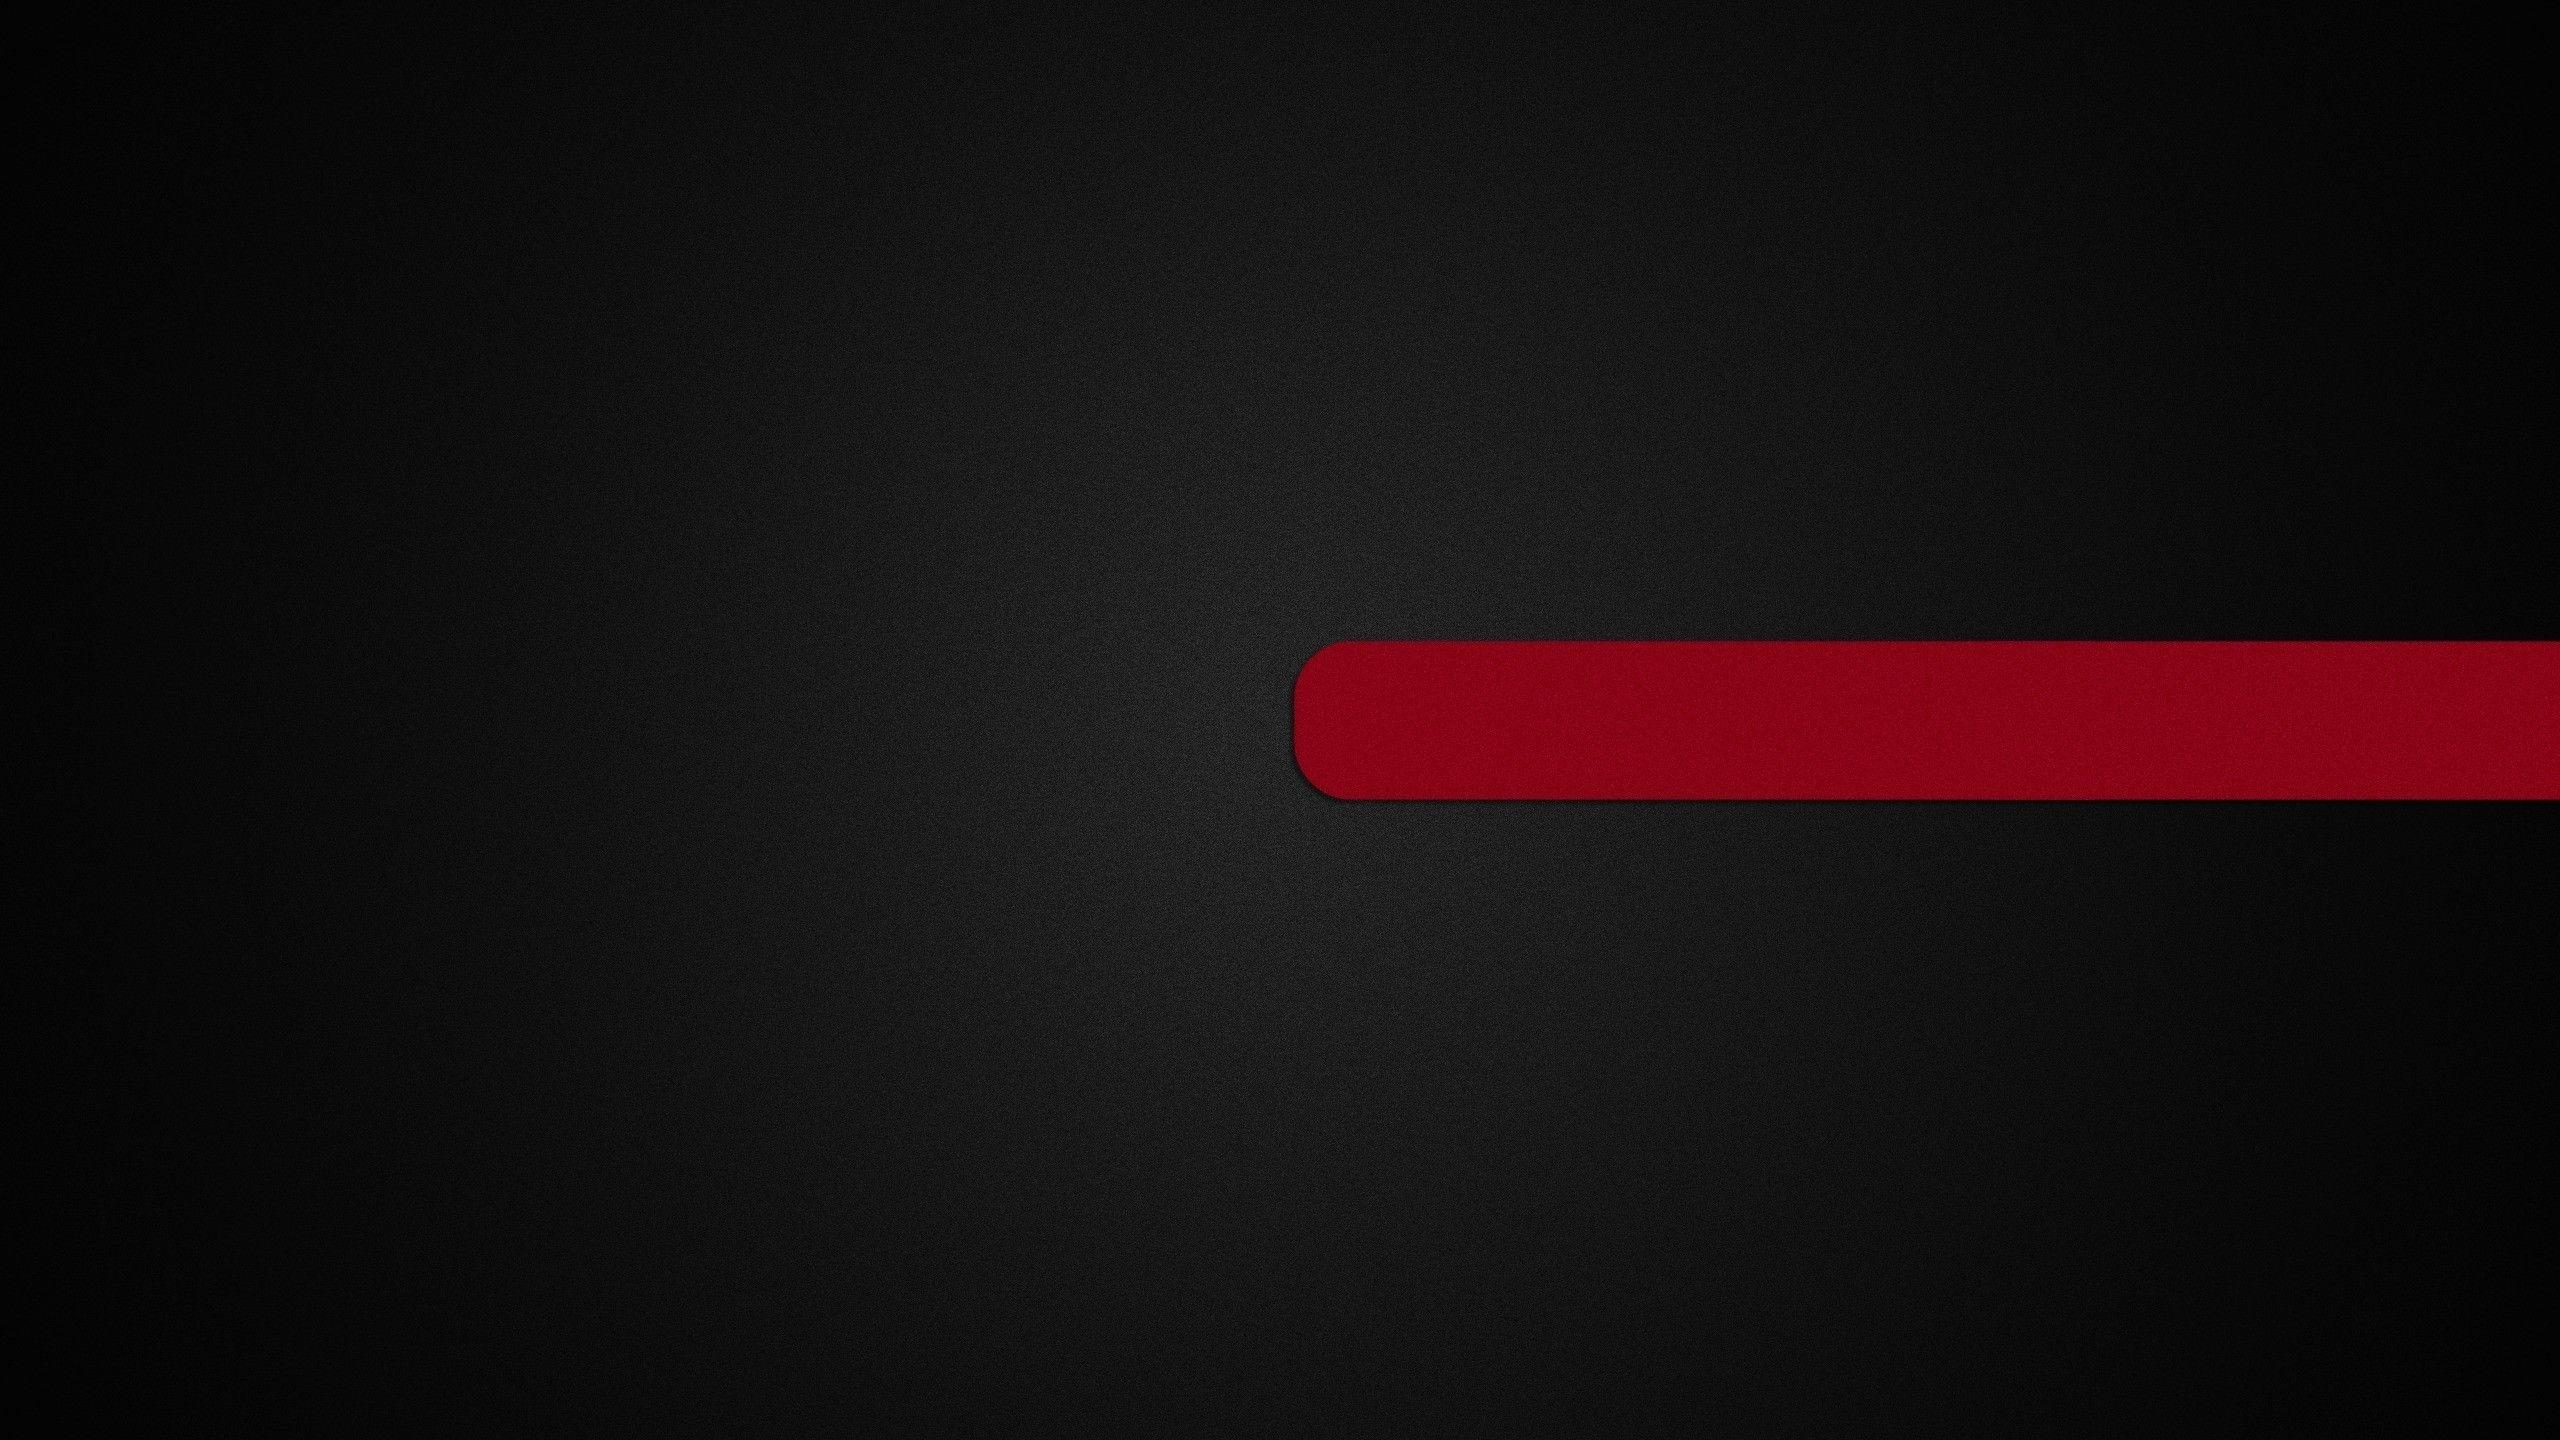 Black And Red Wallpapers Hd - Wallpaper Cave